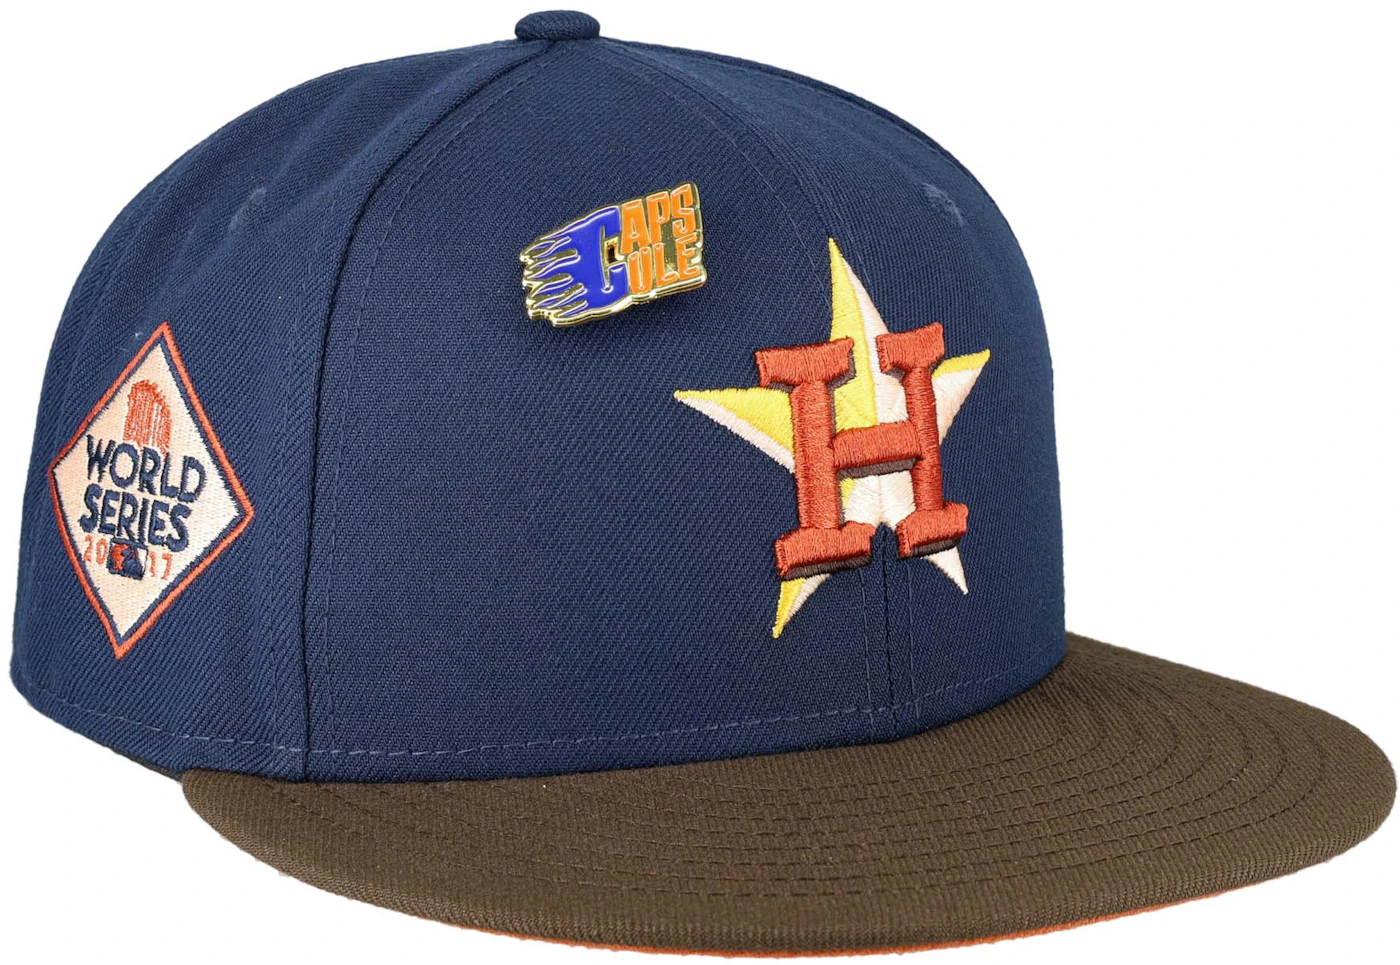 Men's Houston Astros New Era White/Gold 2005 World Series Two-Tone 59FIFTY  Fitted Hat